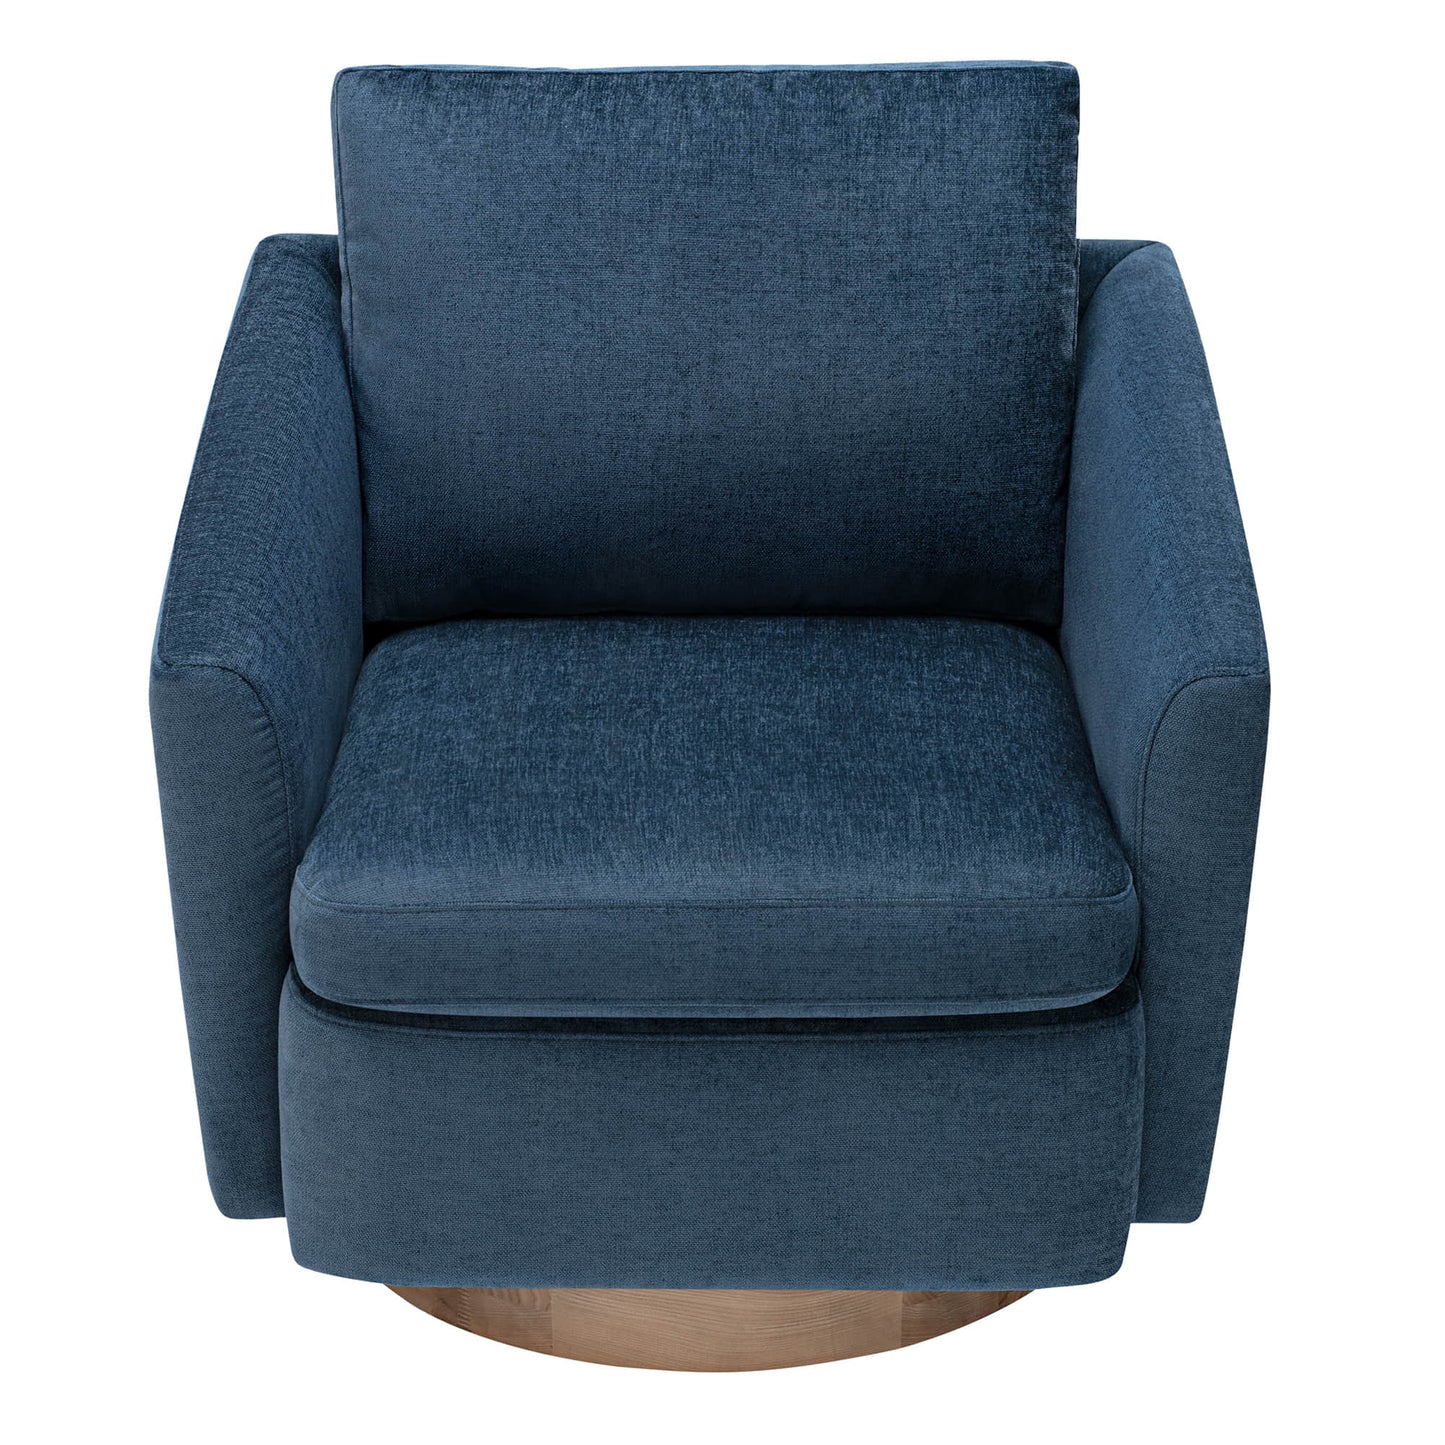 CHITA LIVING-Donella Modern Swivel Accent Chairs-Accent Chair-Fabric-Blue-